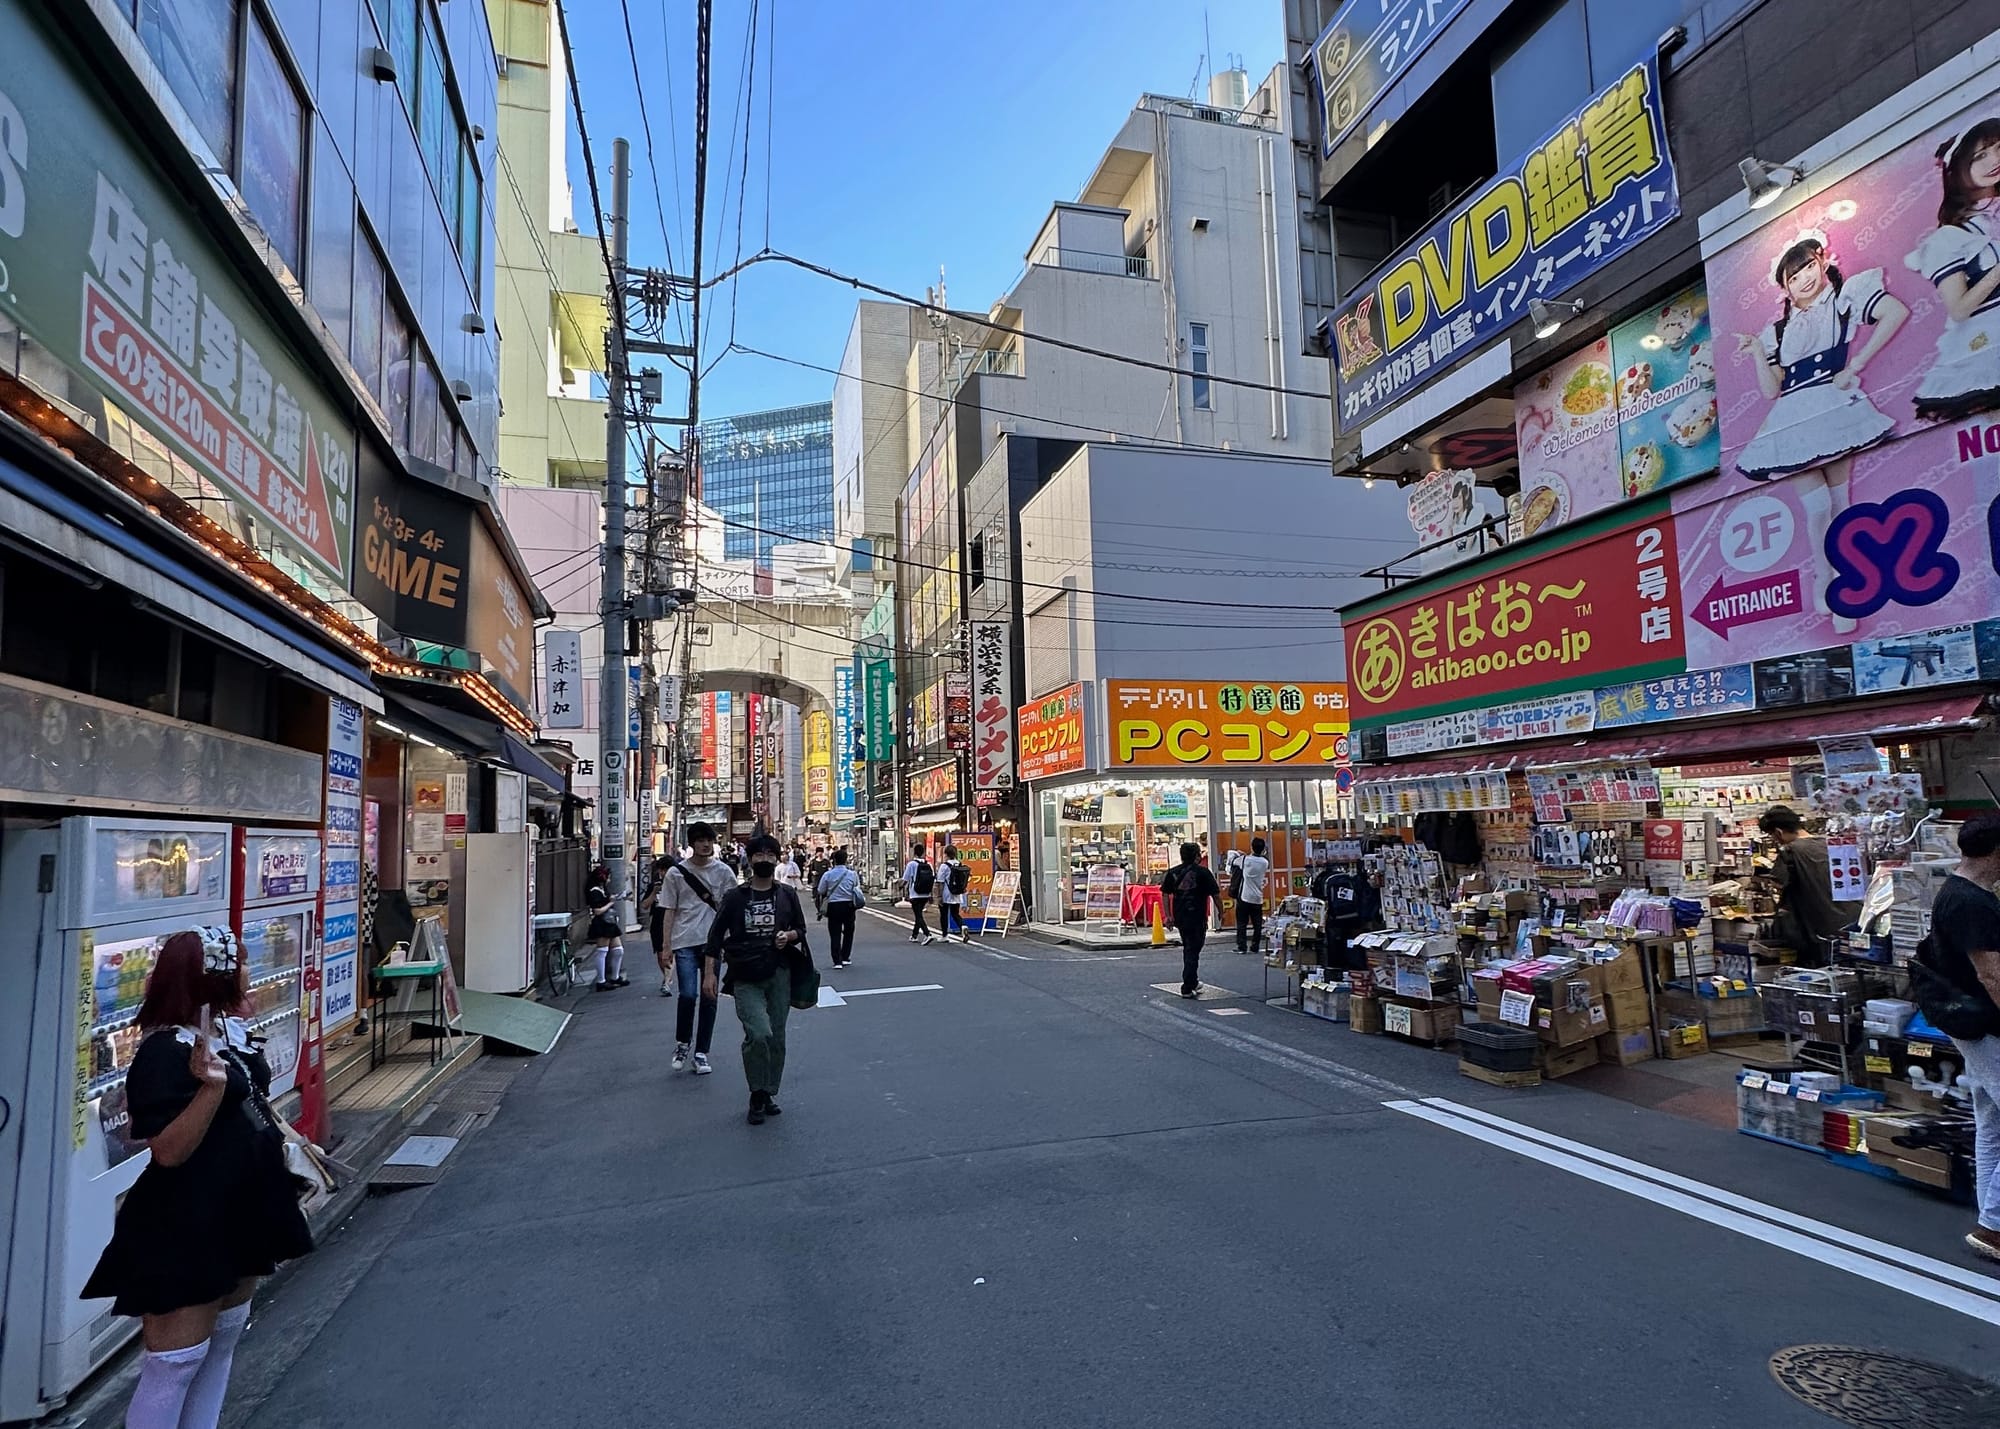 A back street in Akihabara, Tokyo's electronics district